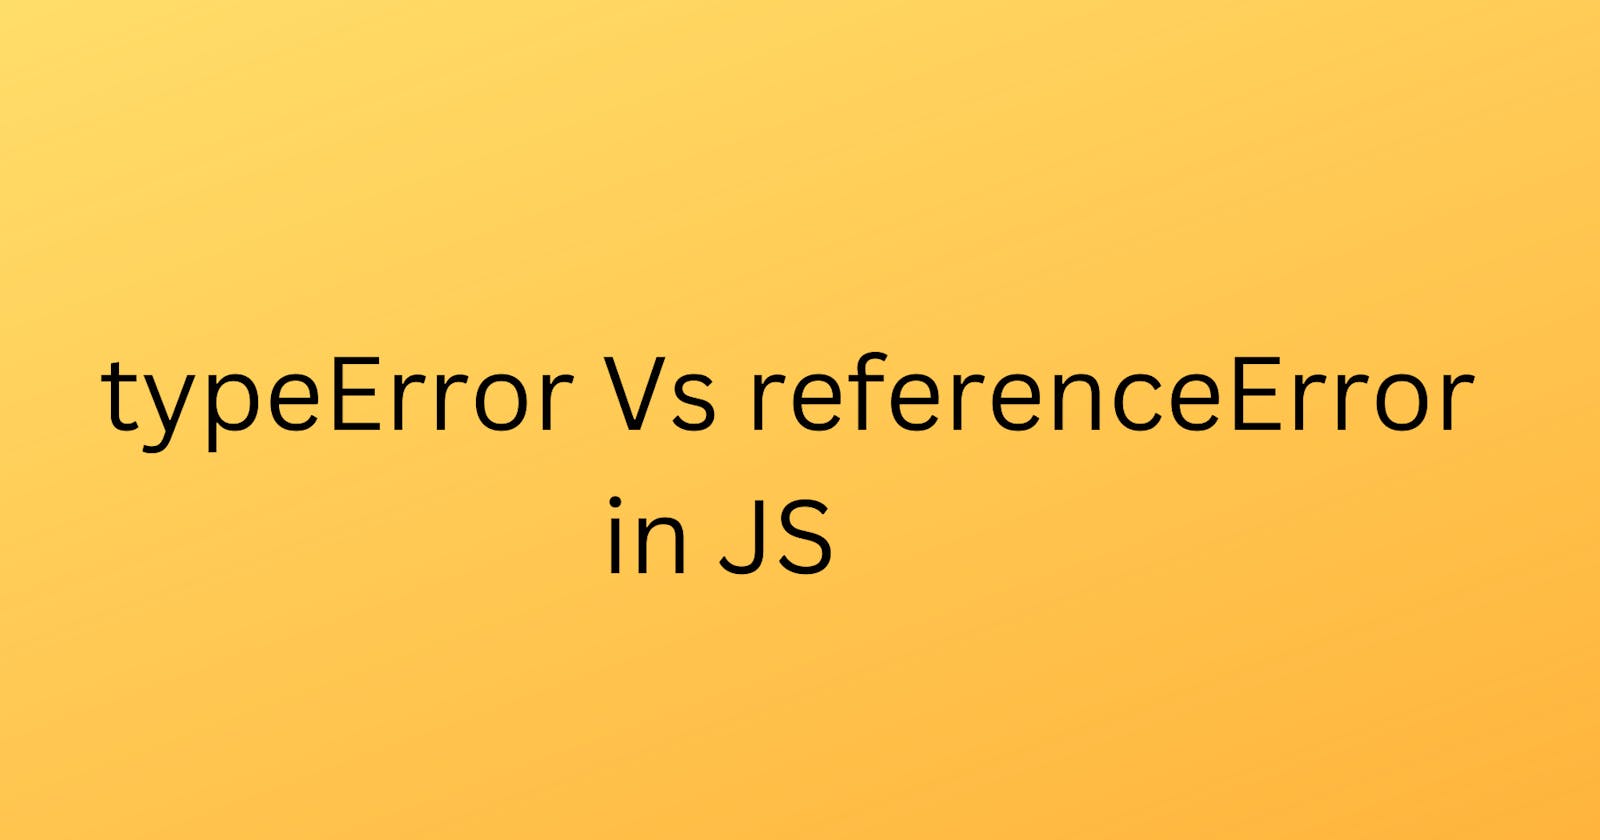 What is the difference between Type Error and Reference Error in JavaScript?